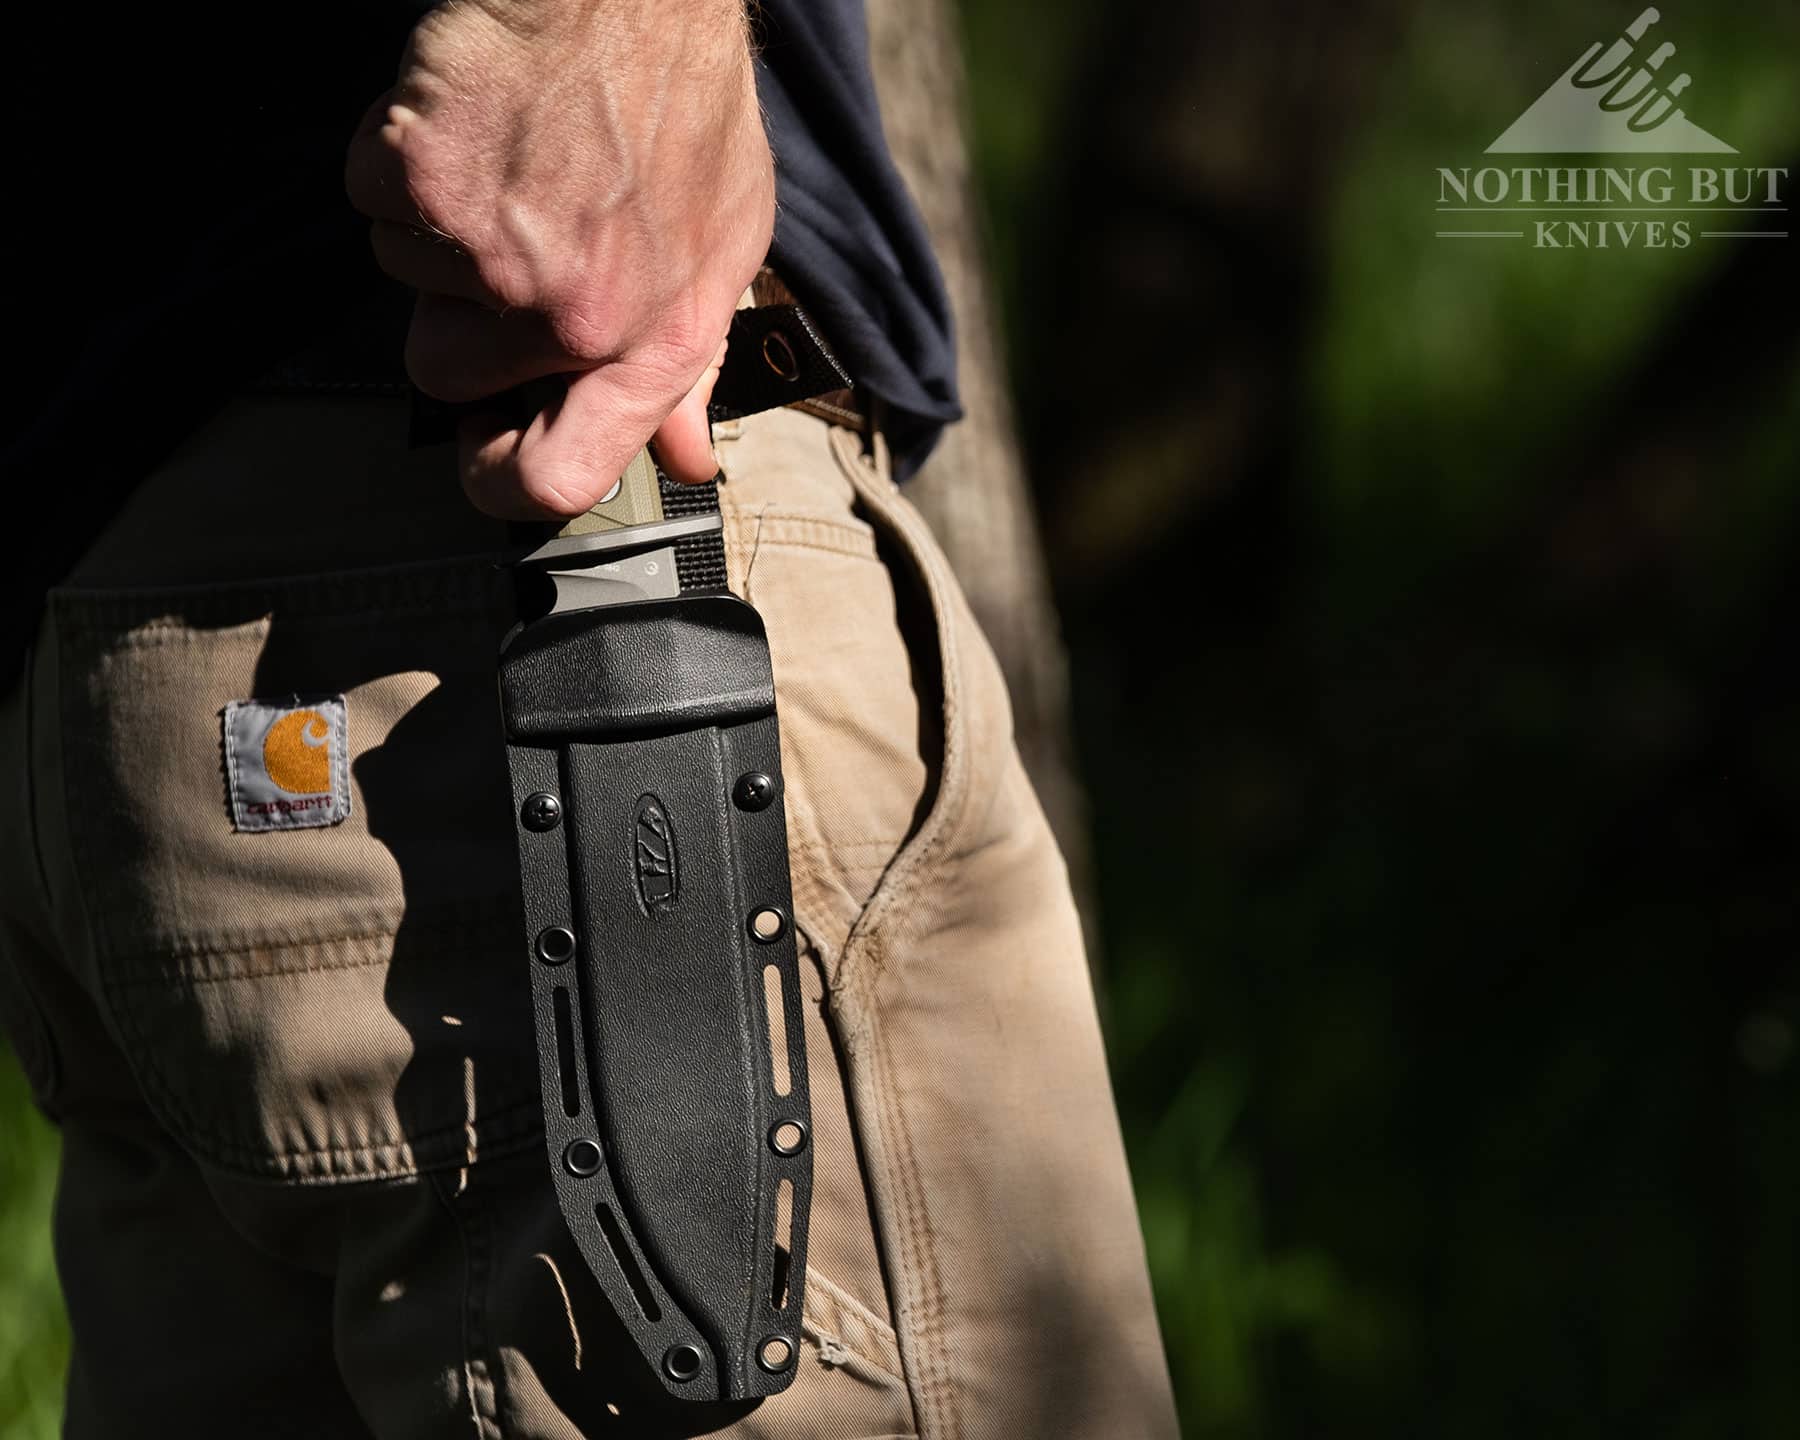 The ZT 6 can be easily and quickly drawn from its sheath. 